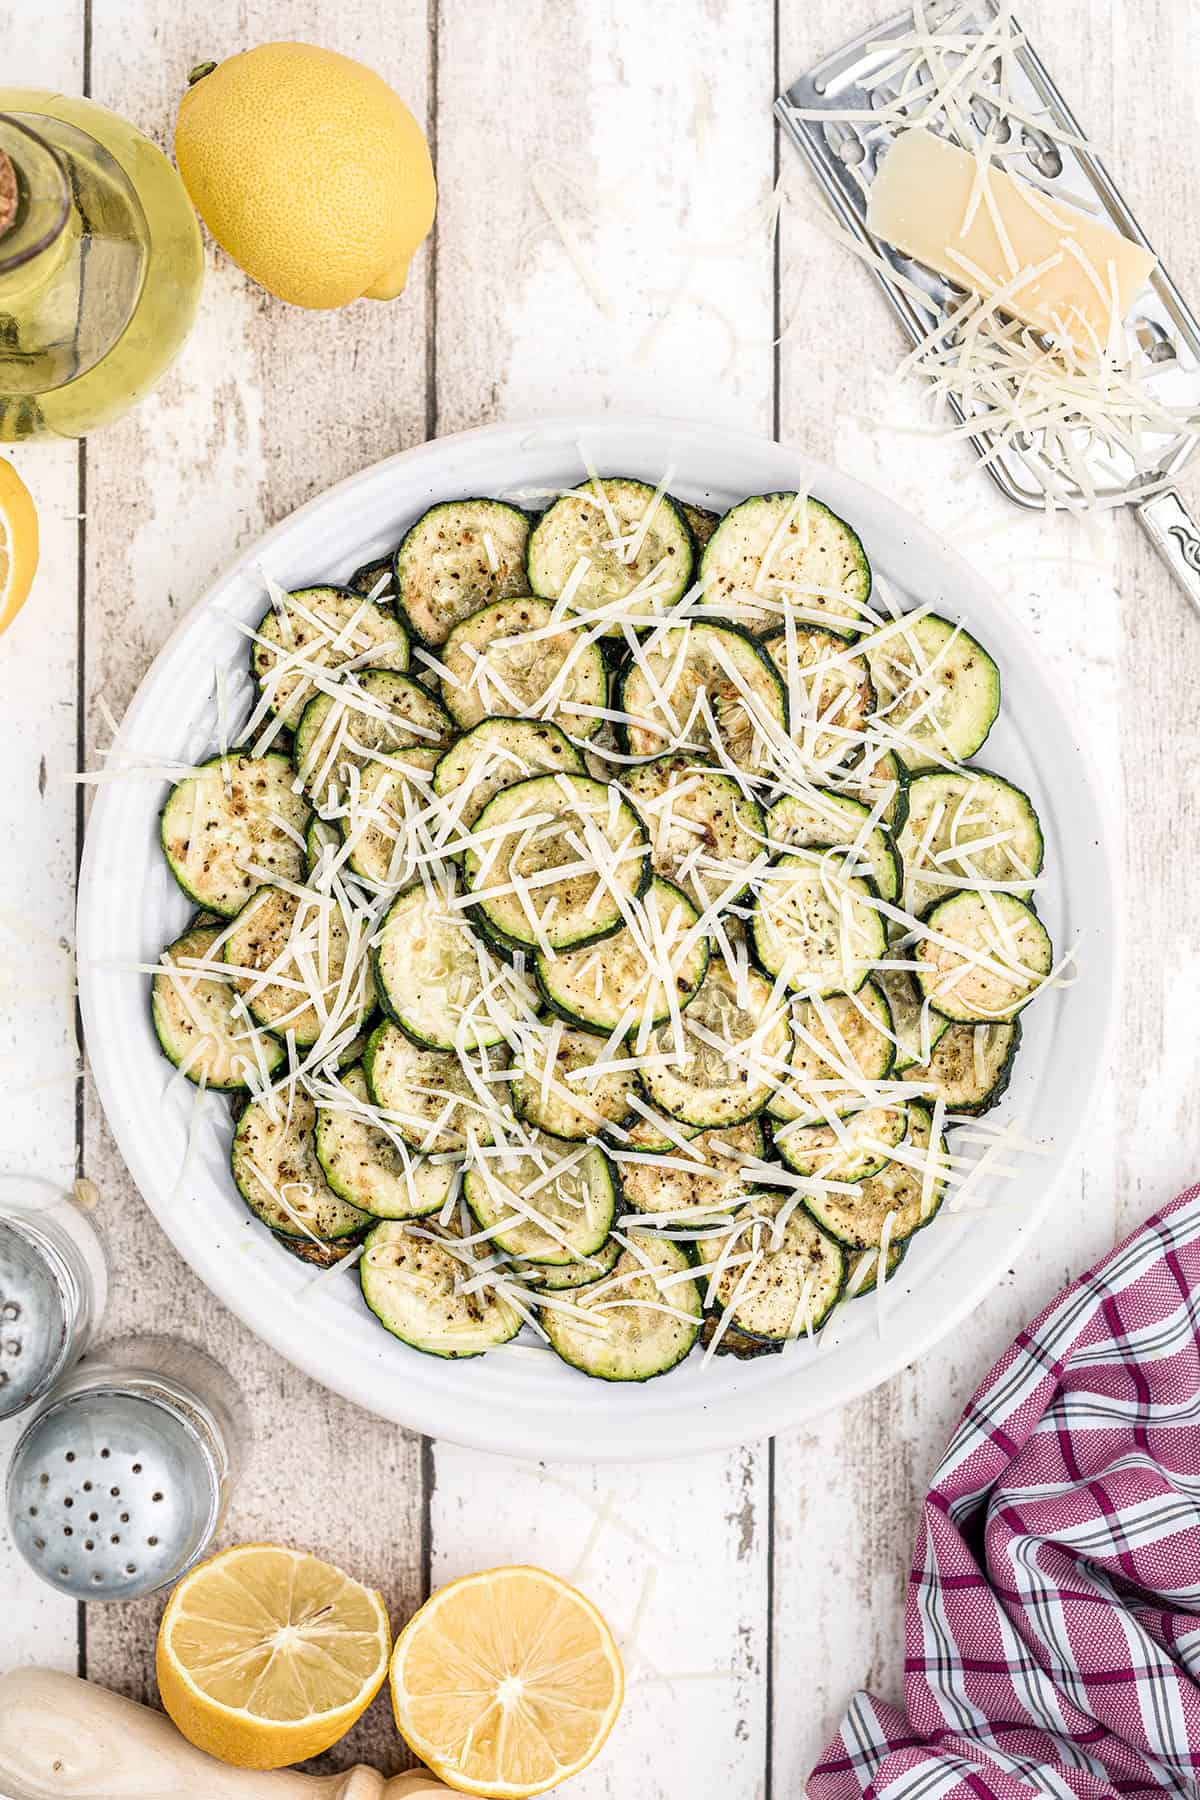 Finished zucchini on a serving plate.